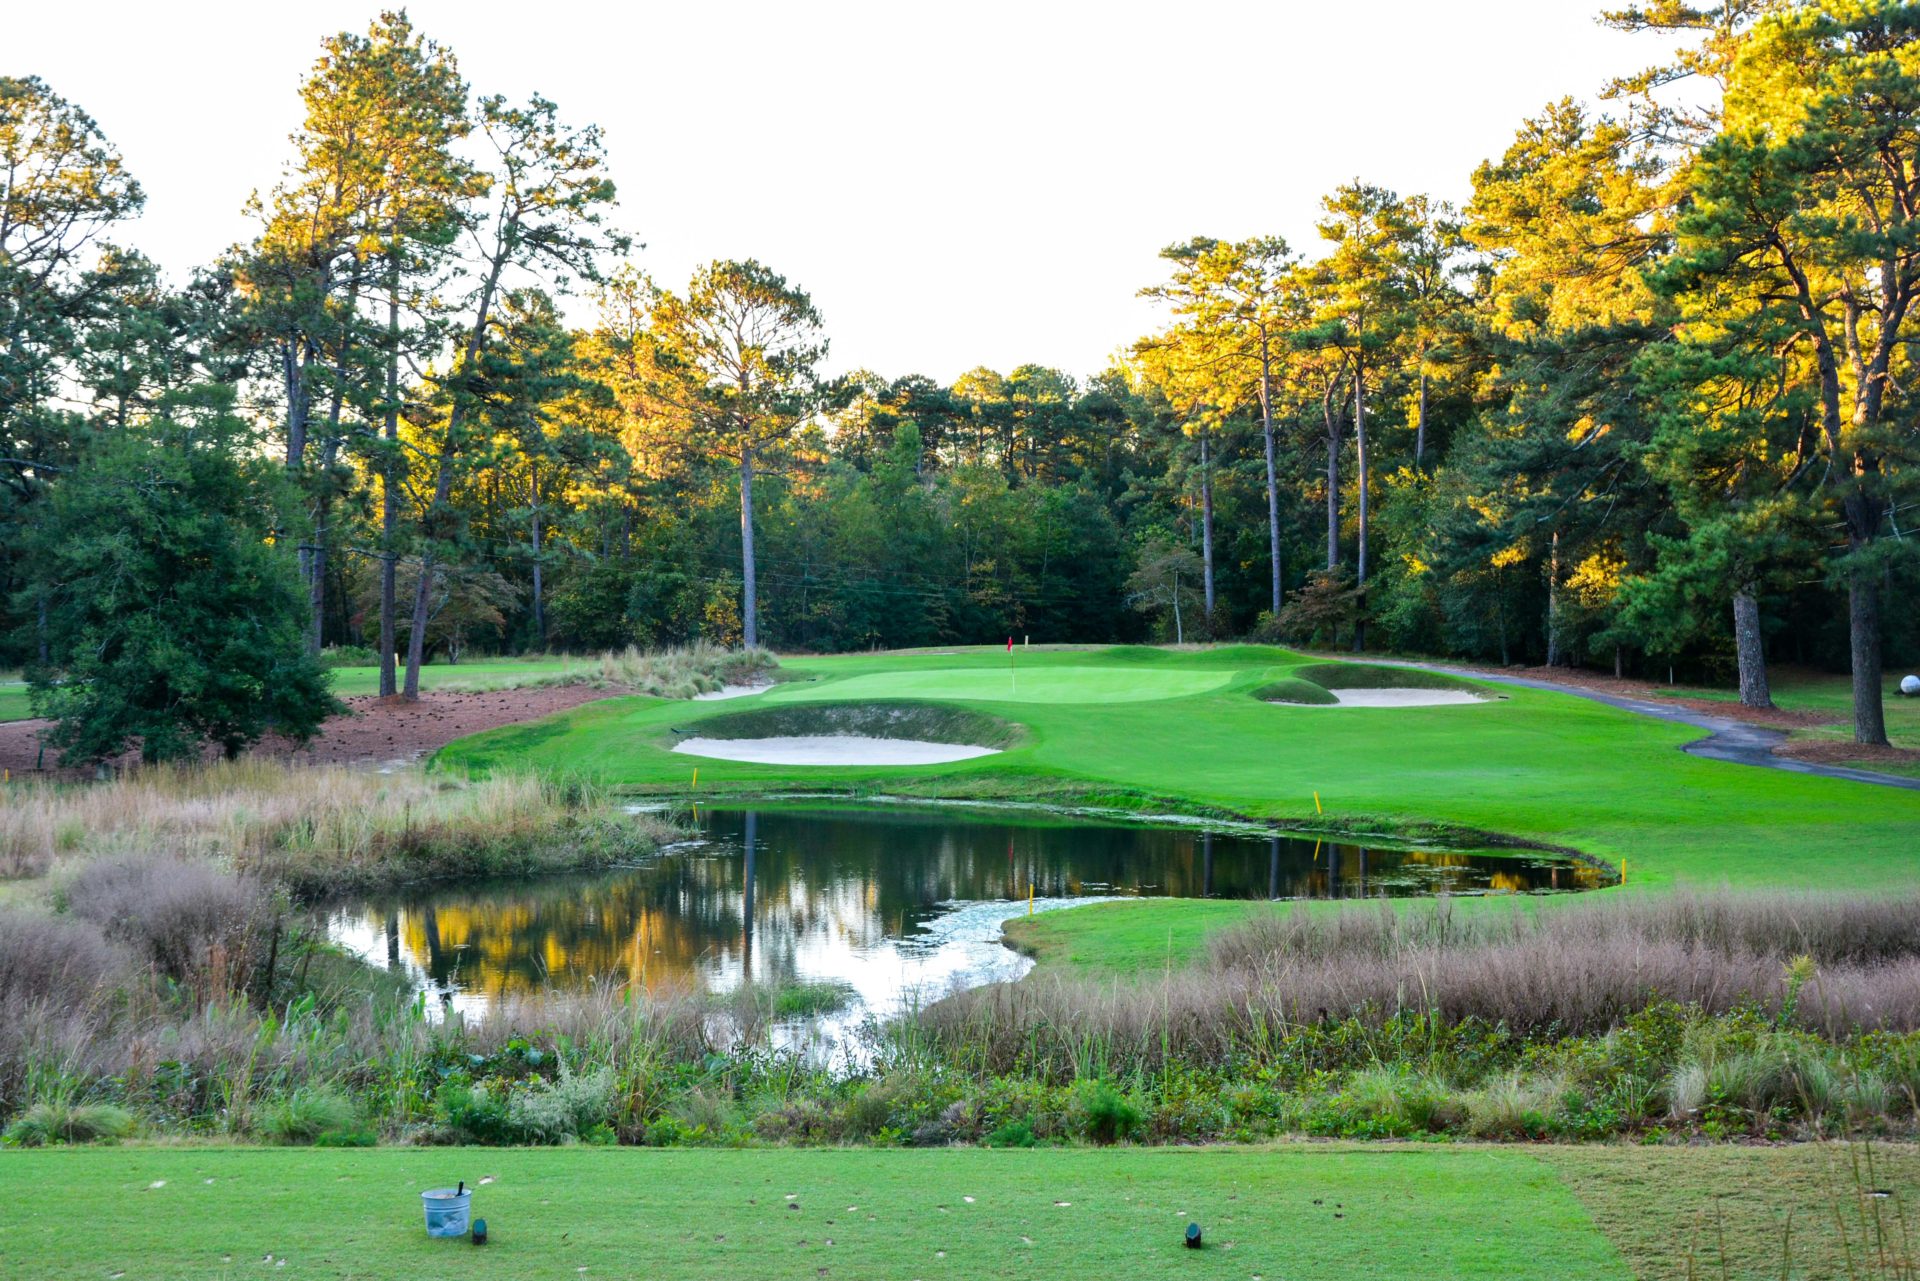 Third hole at Pine Needles Golf Course